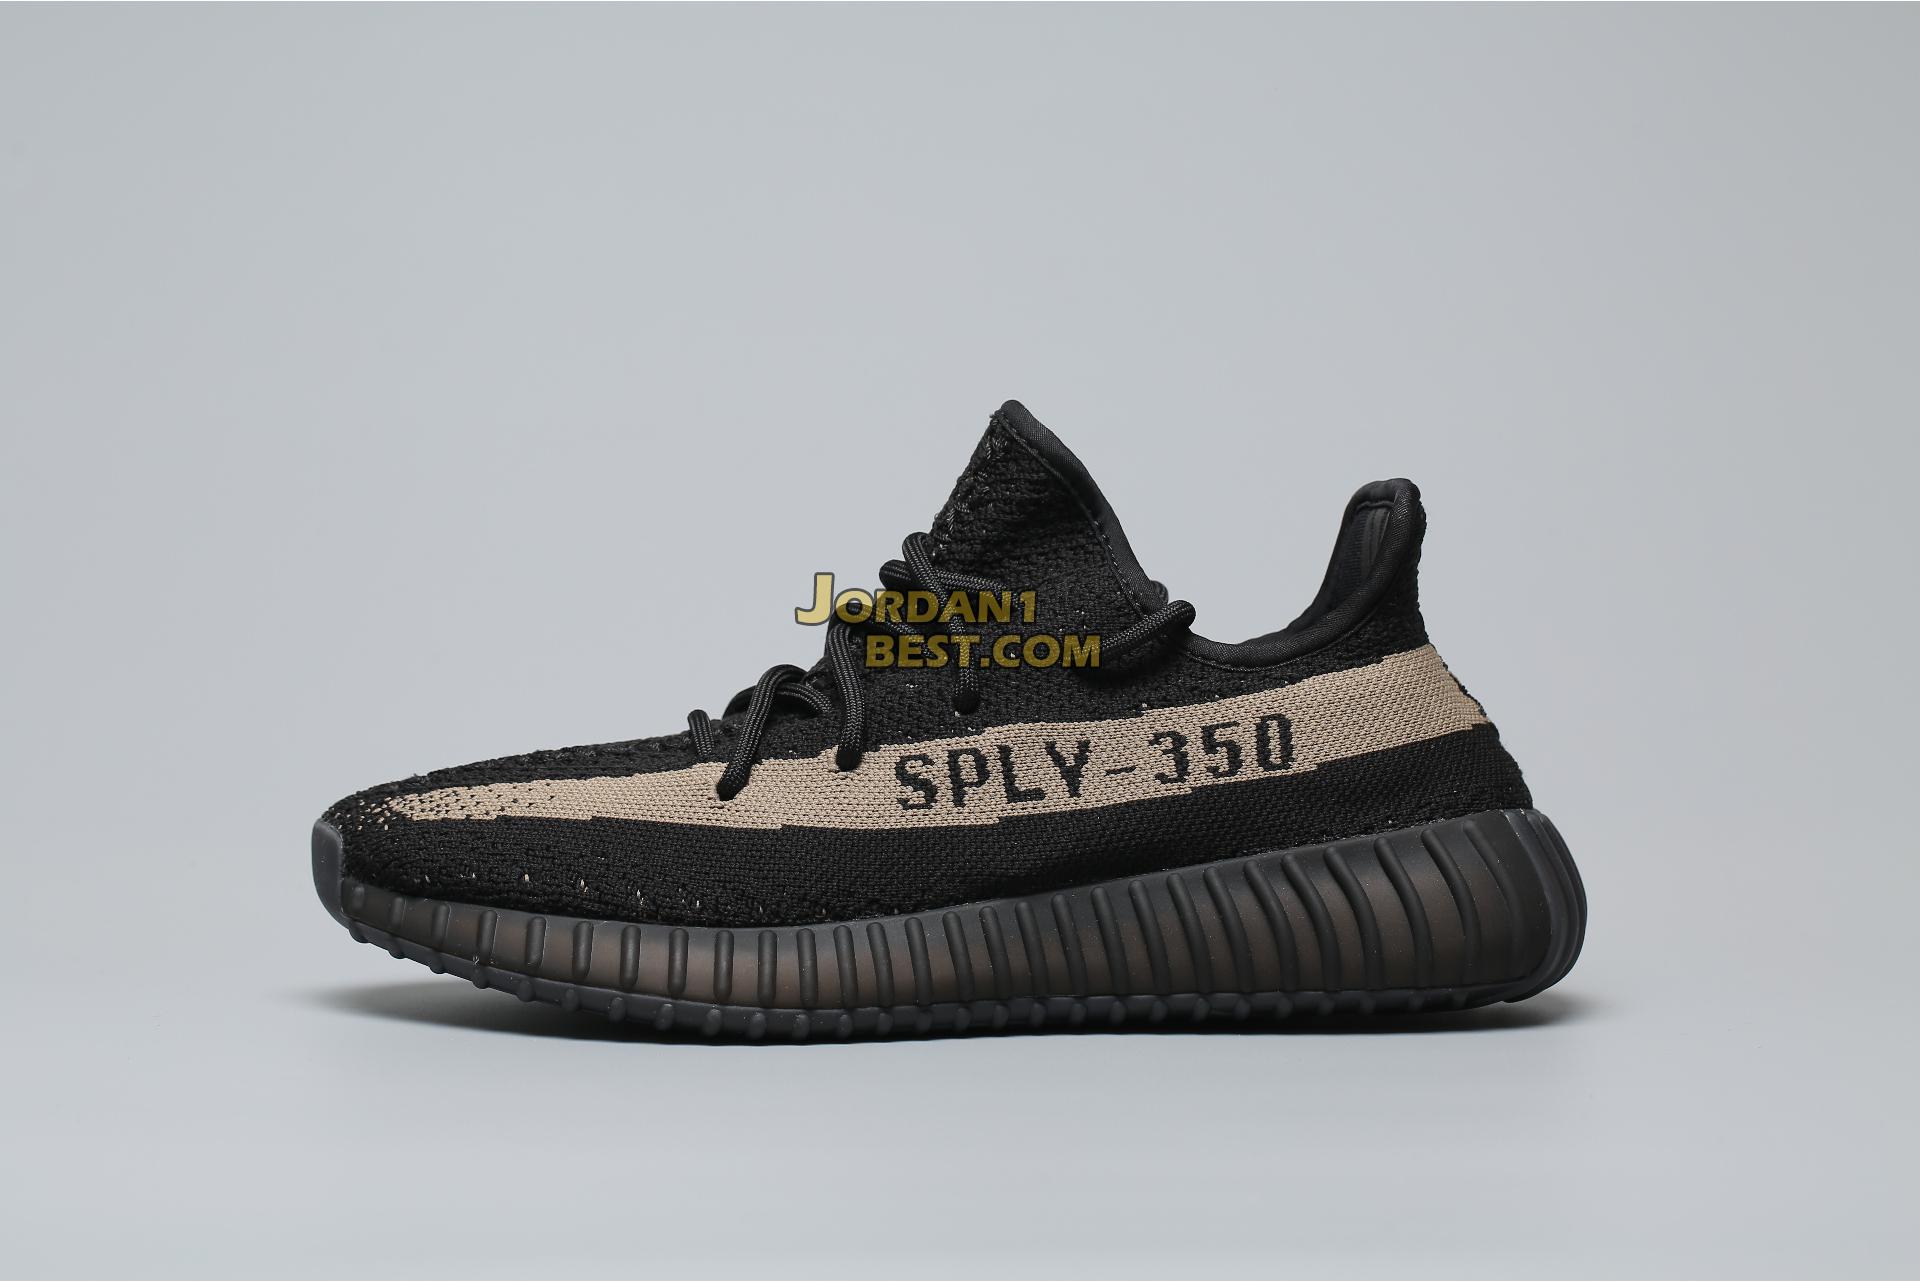 Adidas Yeezy Boost 350 V2 "Green" BY9611